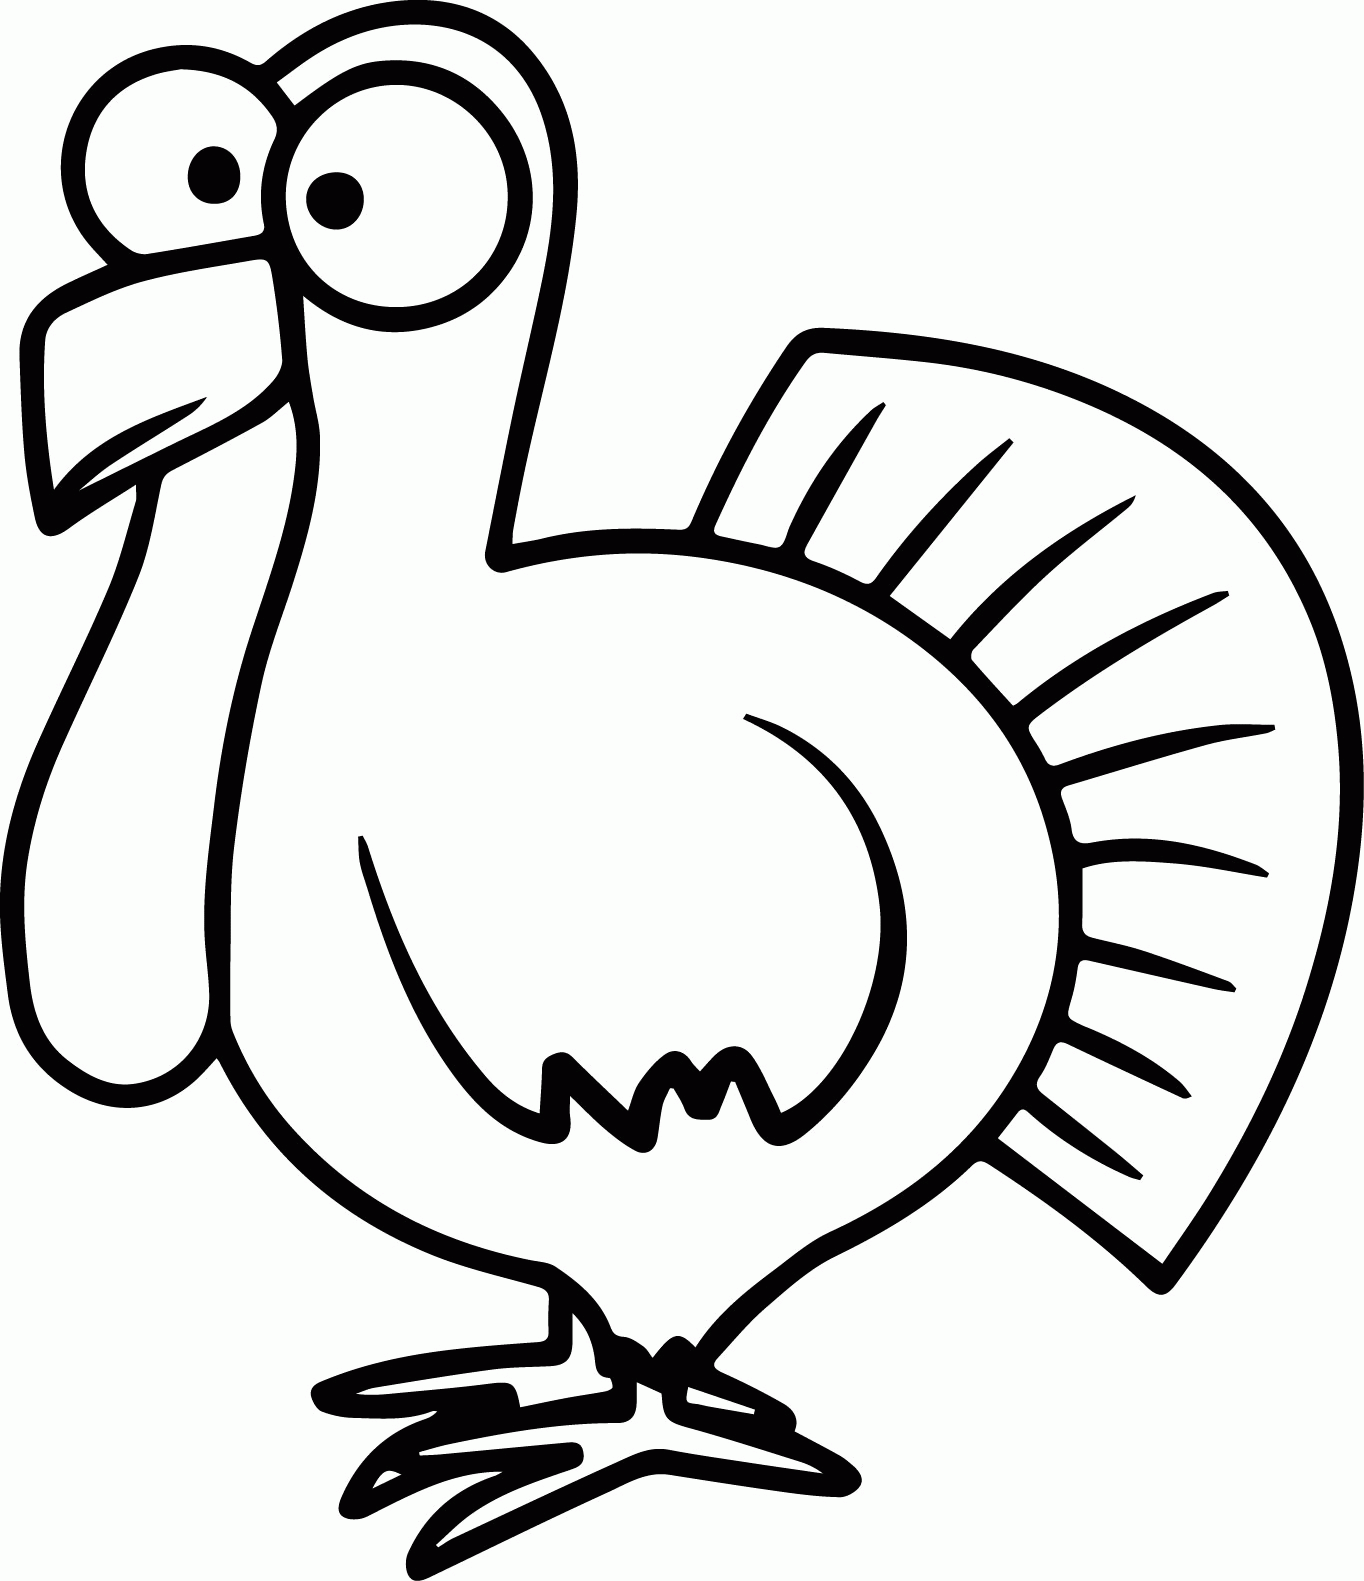 Turkey Coloring Page 01 | Wecoloringpage